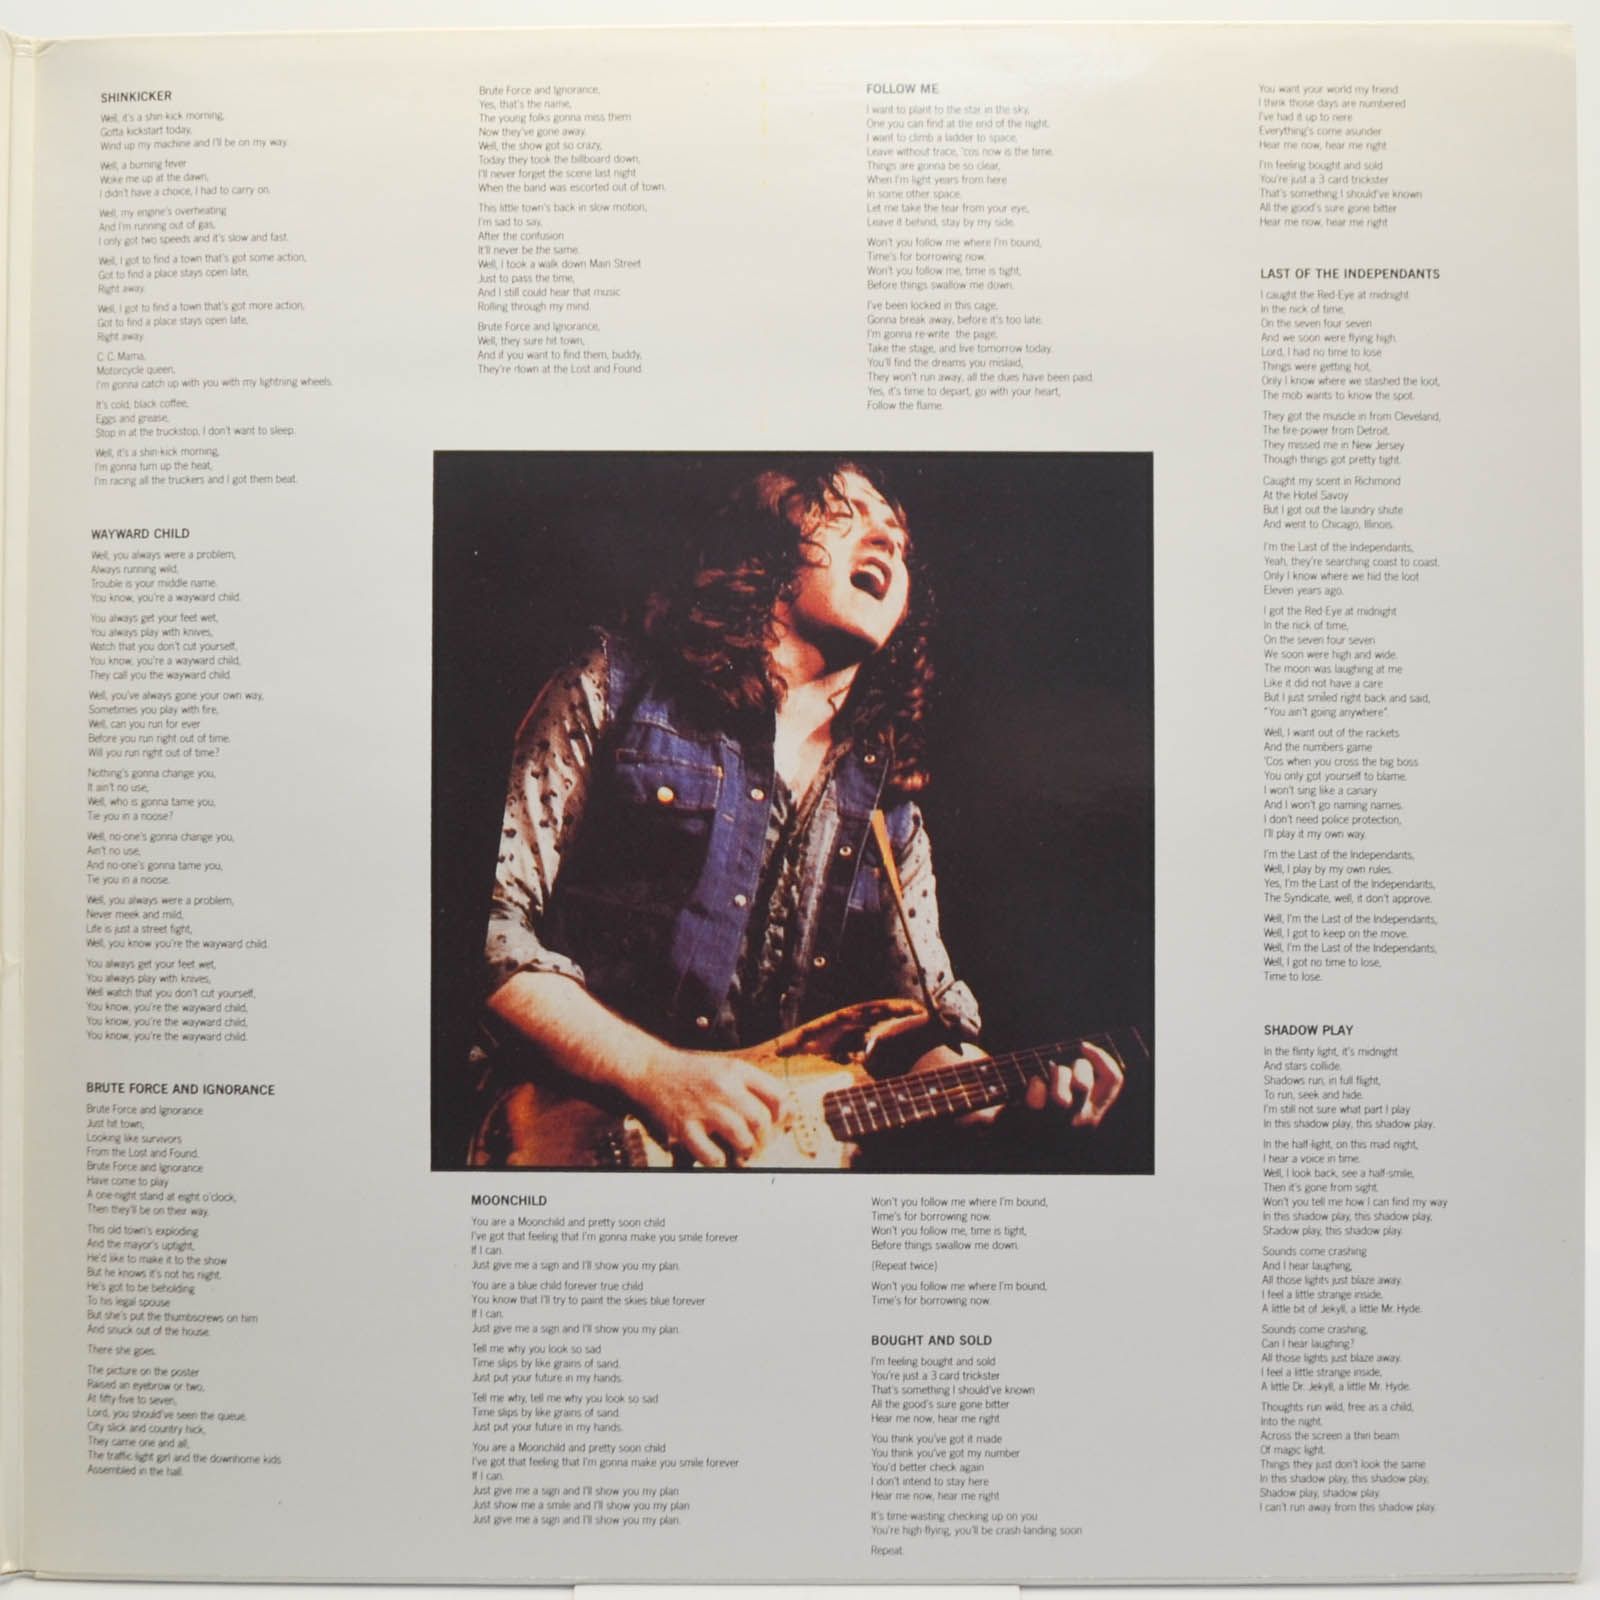 Rory Gallagher — Live! In Europe / Stage Struck (Recorded Live) (2LP, UK), 1989